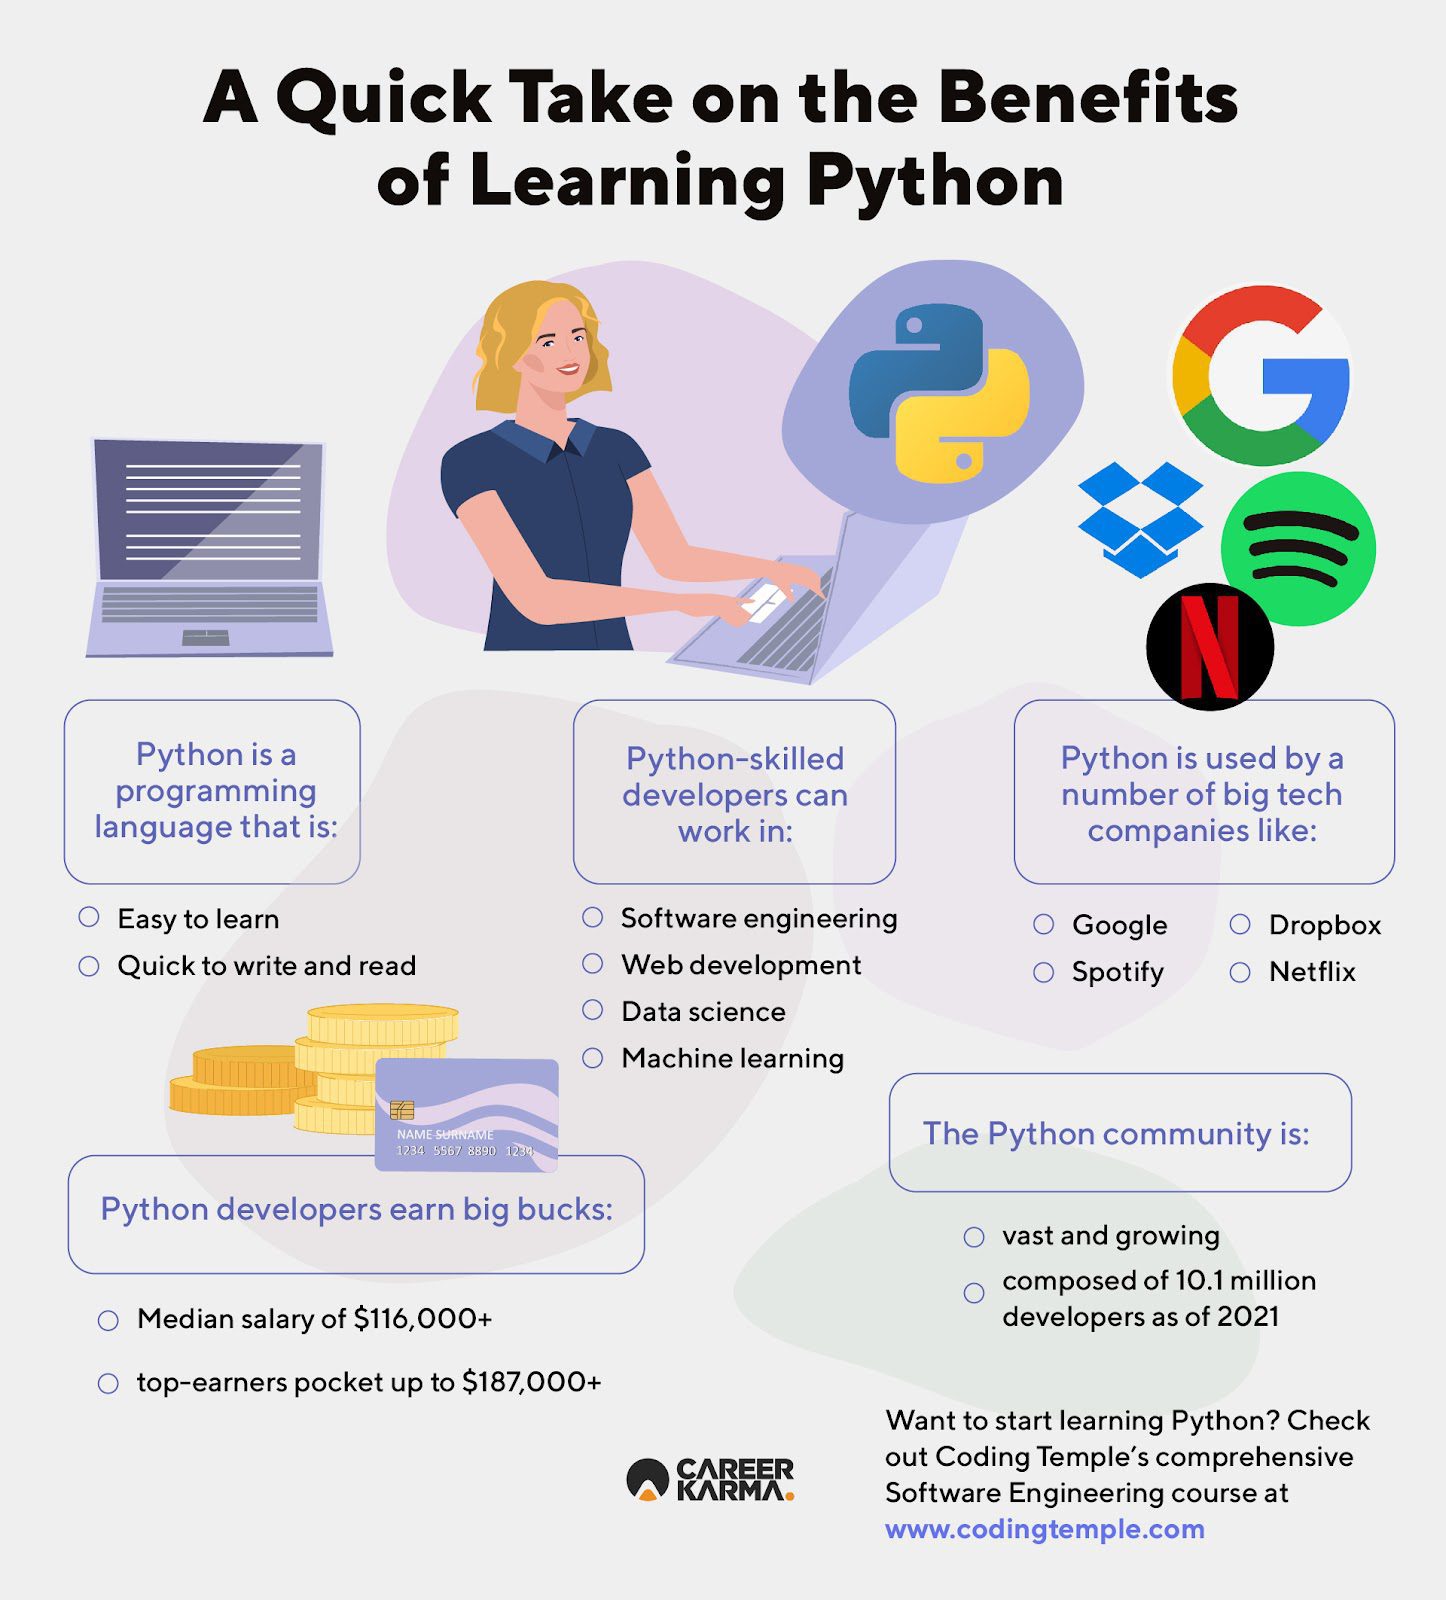 An infographic listing the benefits of learning Python programming